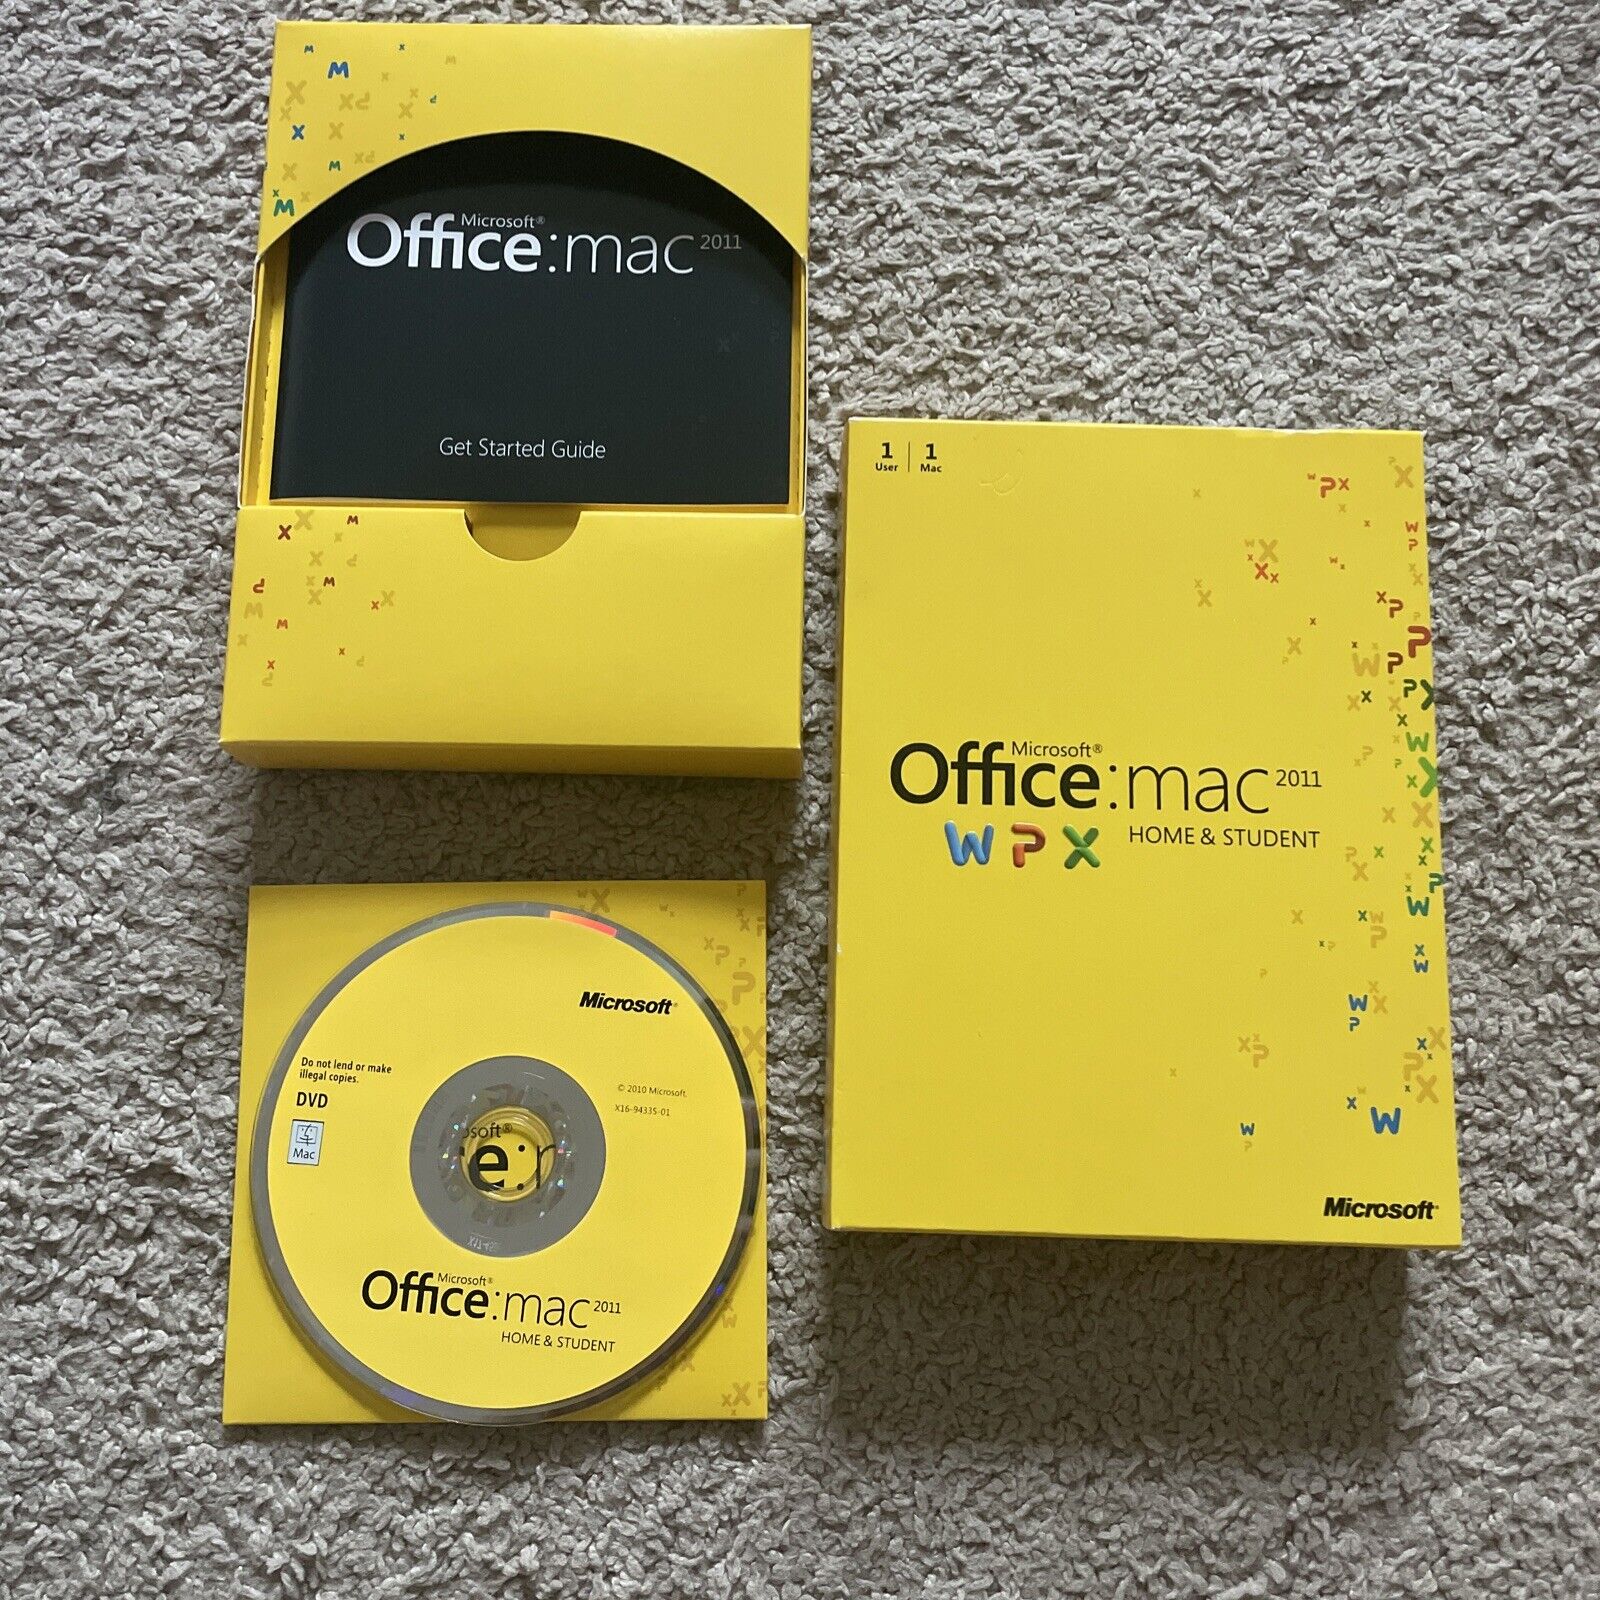 Microsoft Office Mac 2011 Home and Student with Product Key…